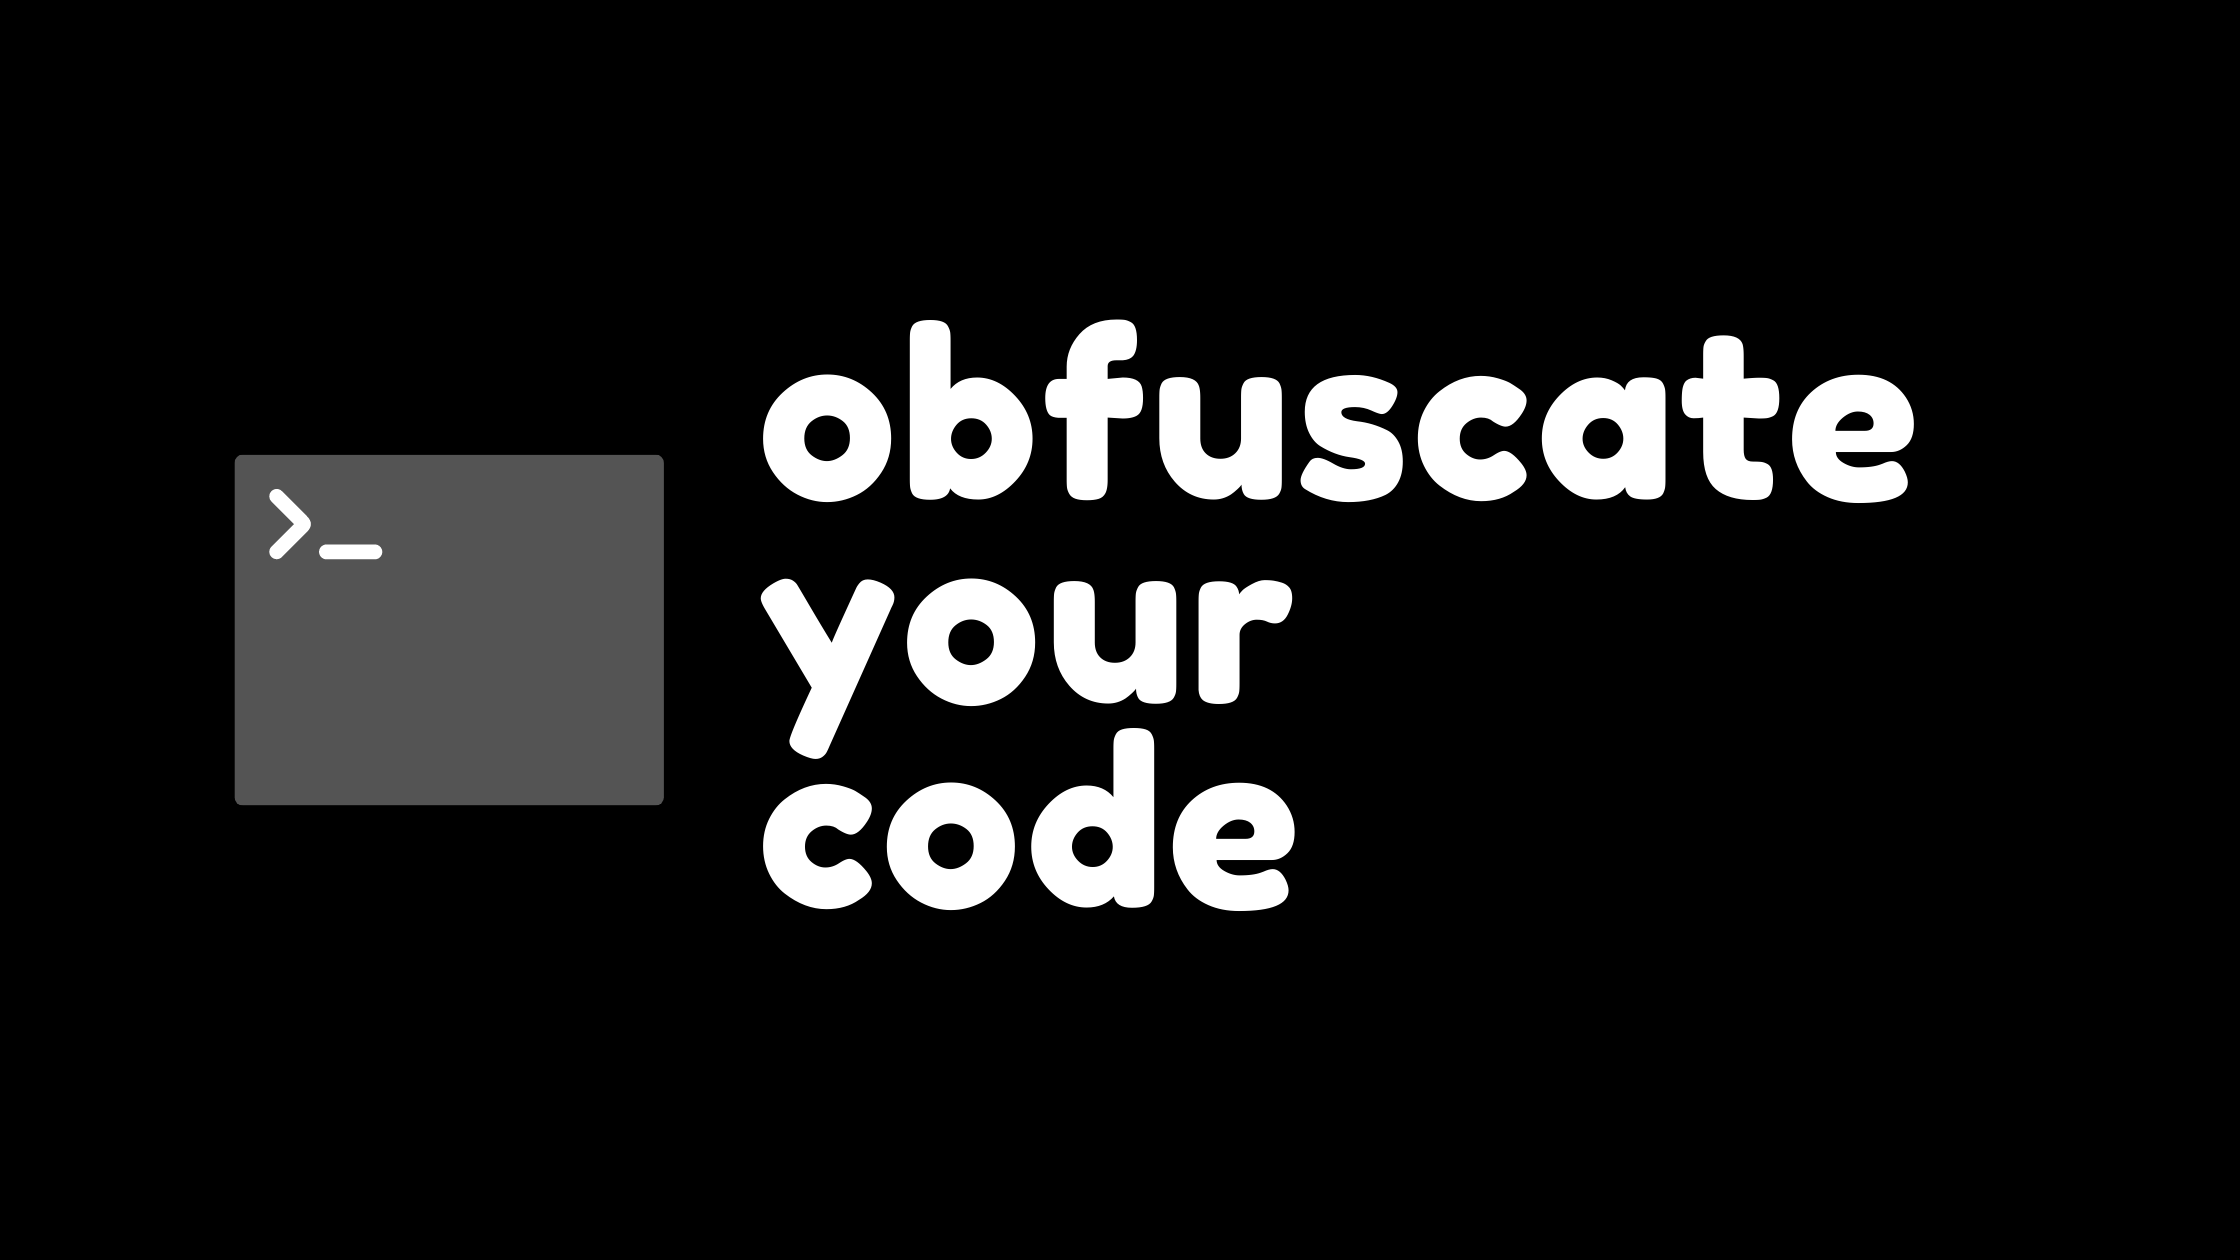 Why should you "obfuscate" your code